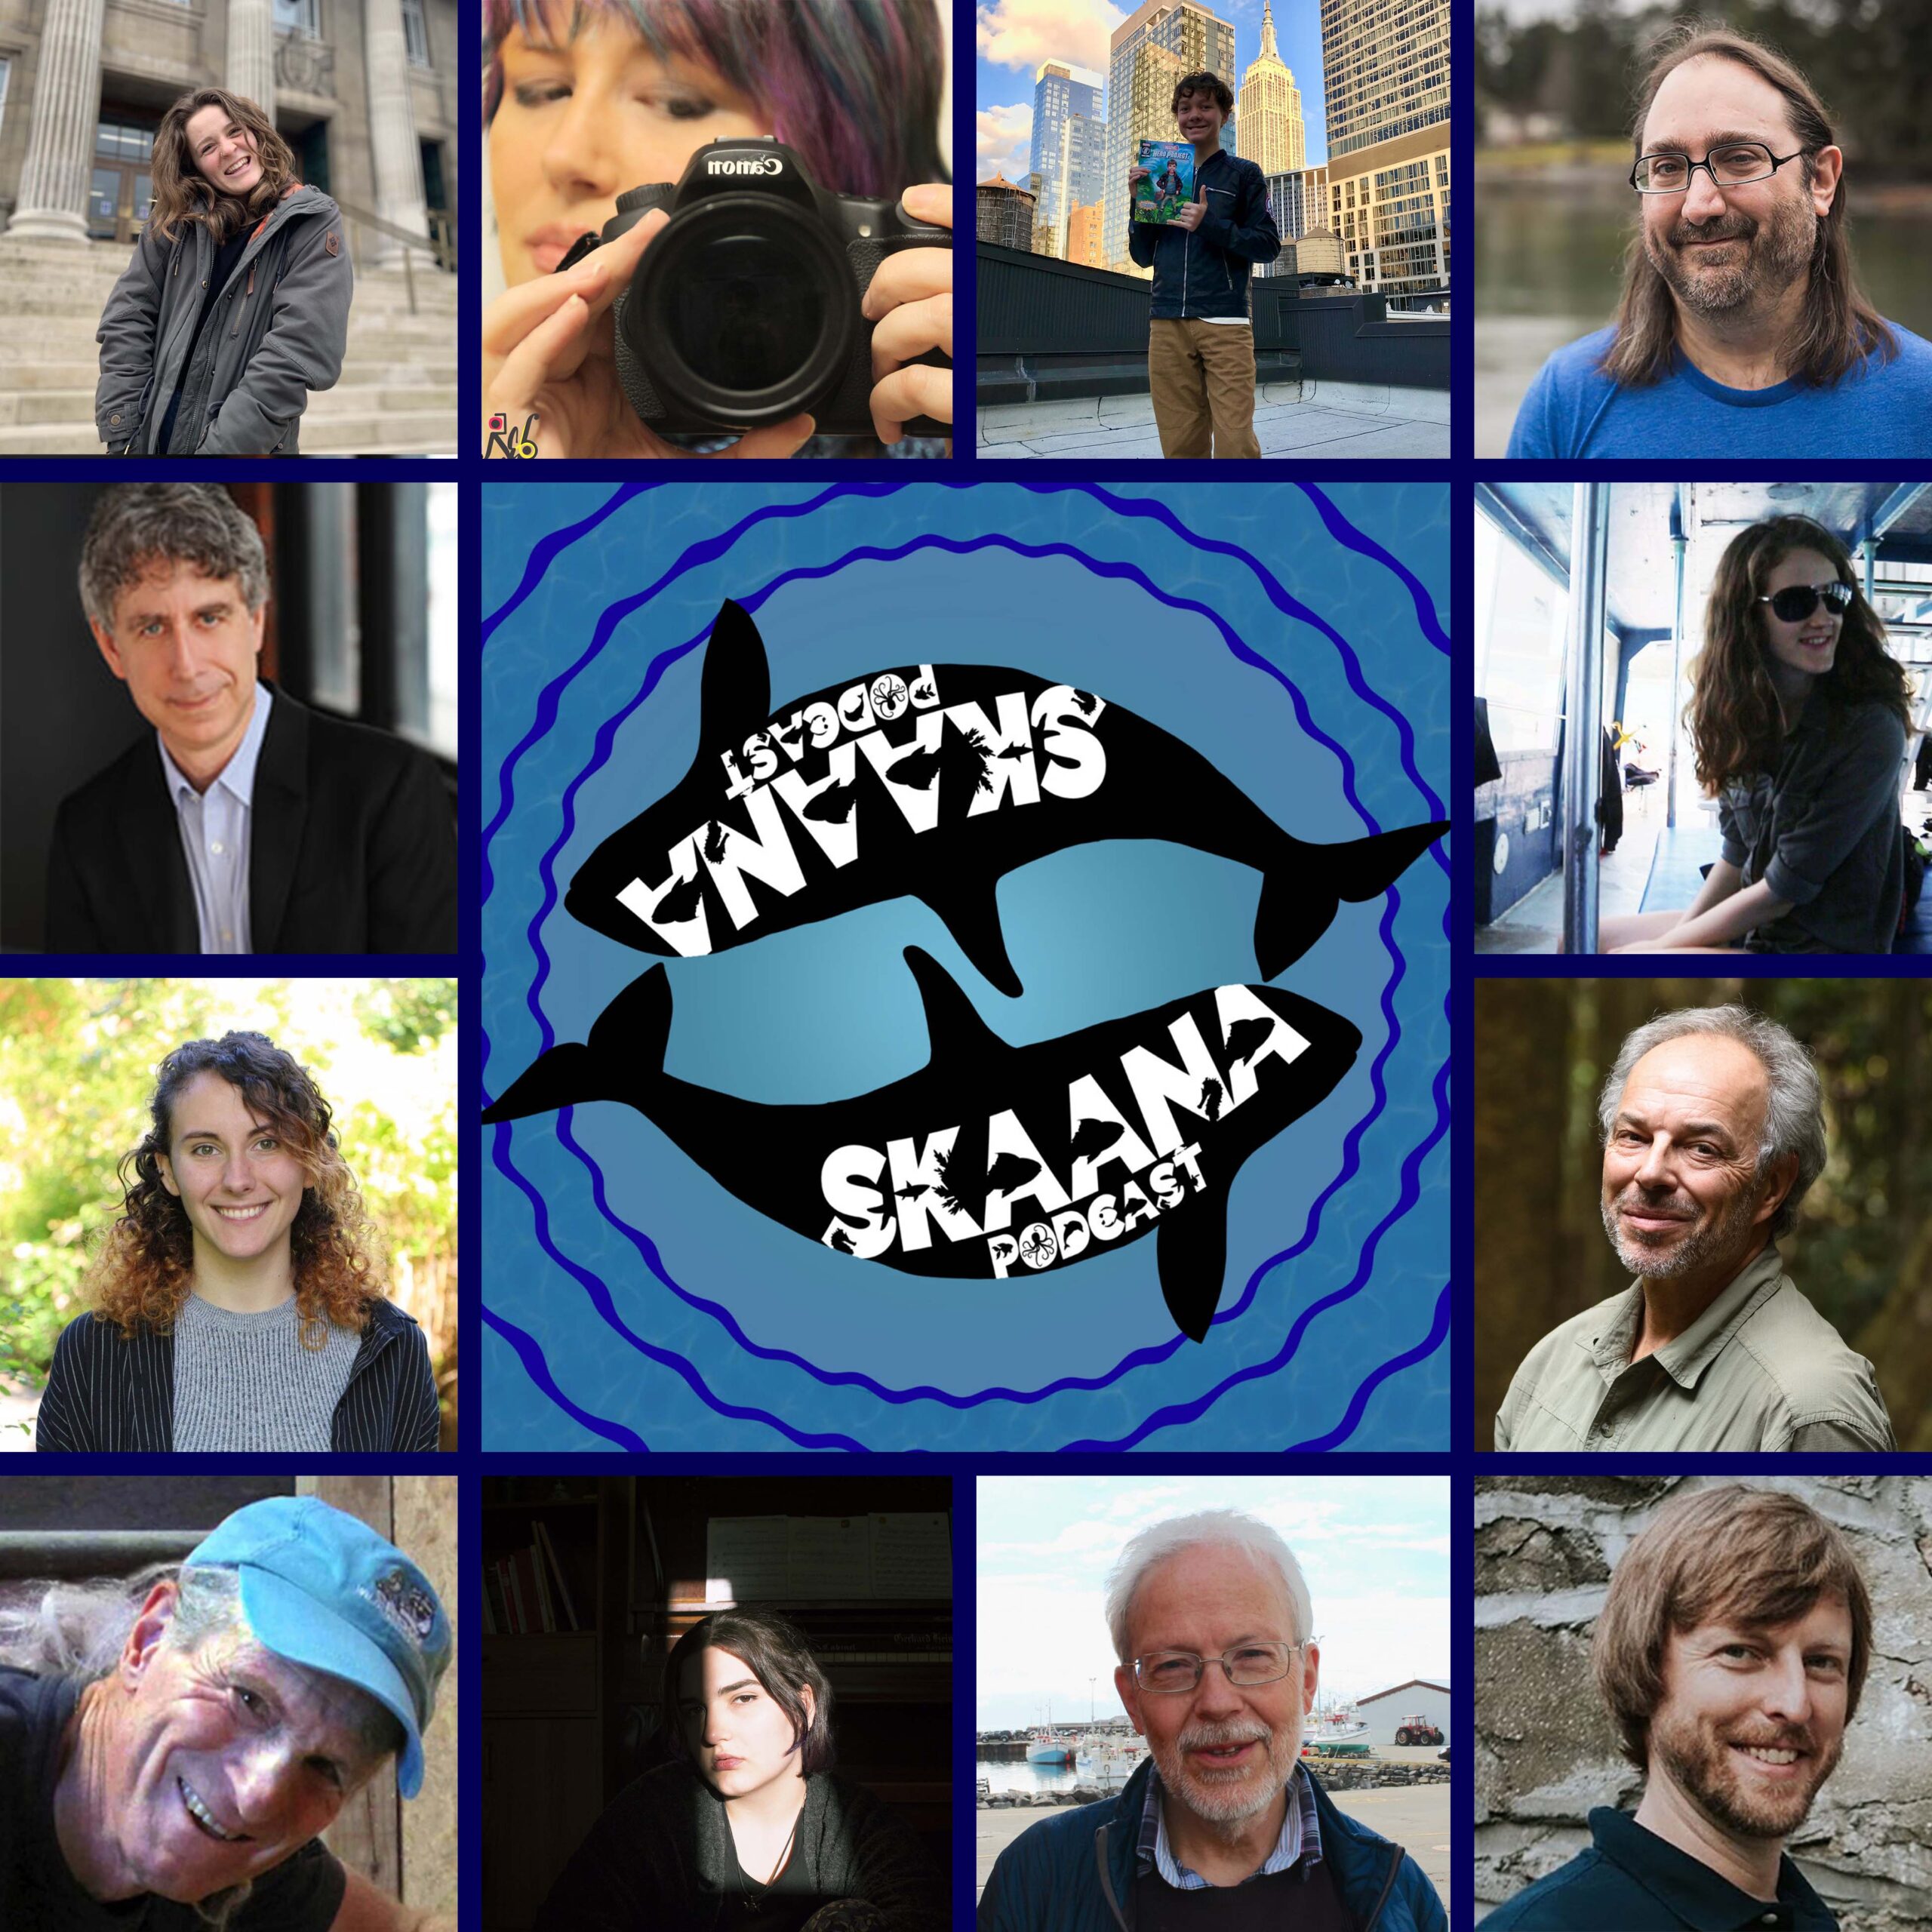 New Years wishes for humans and fishes from Erich Hoyt, Joel Bakan, Marc Bekoff, Carl Safina, Julia Barnes, Robbie Bond & Team Skaana